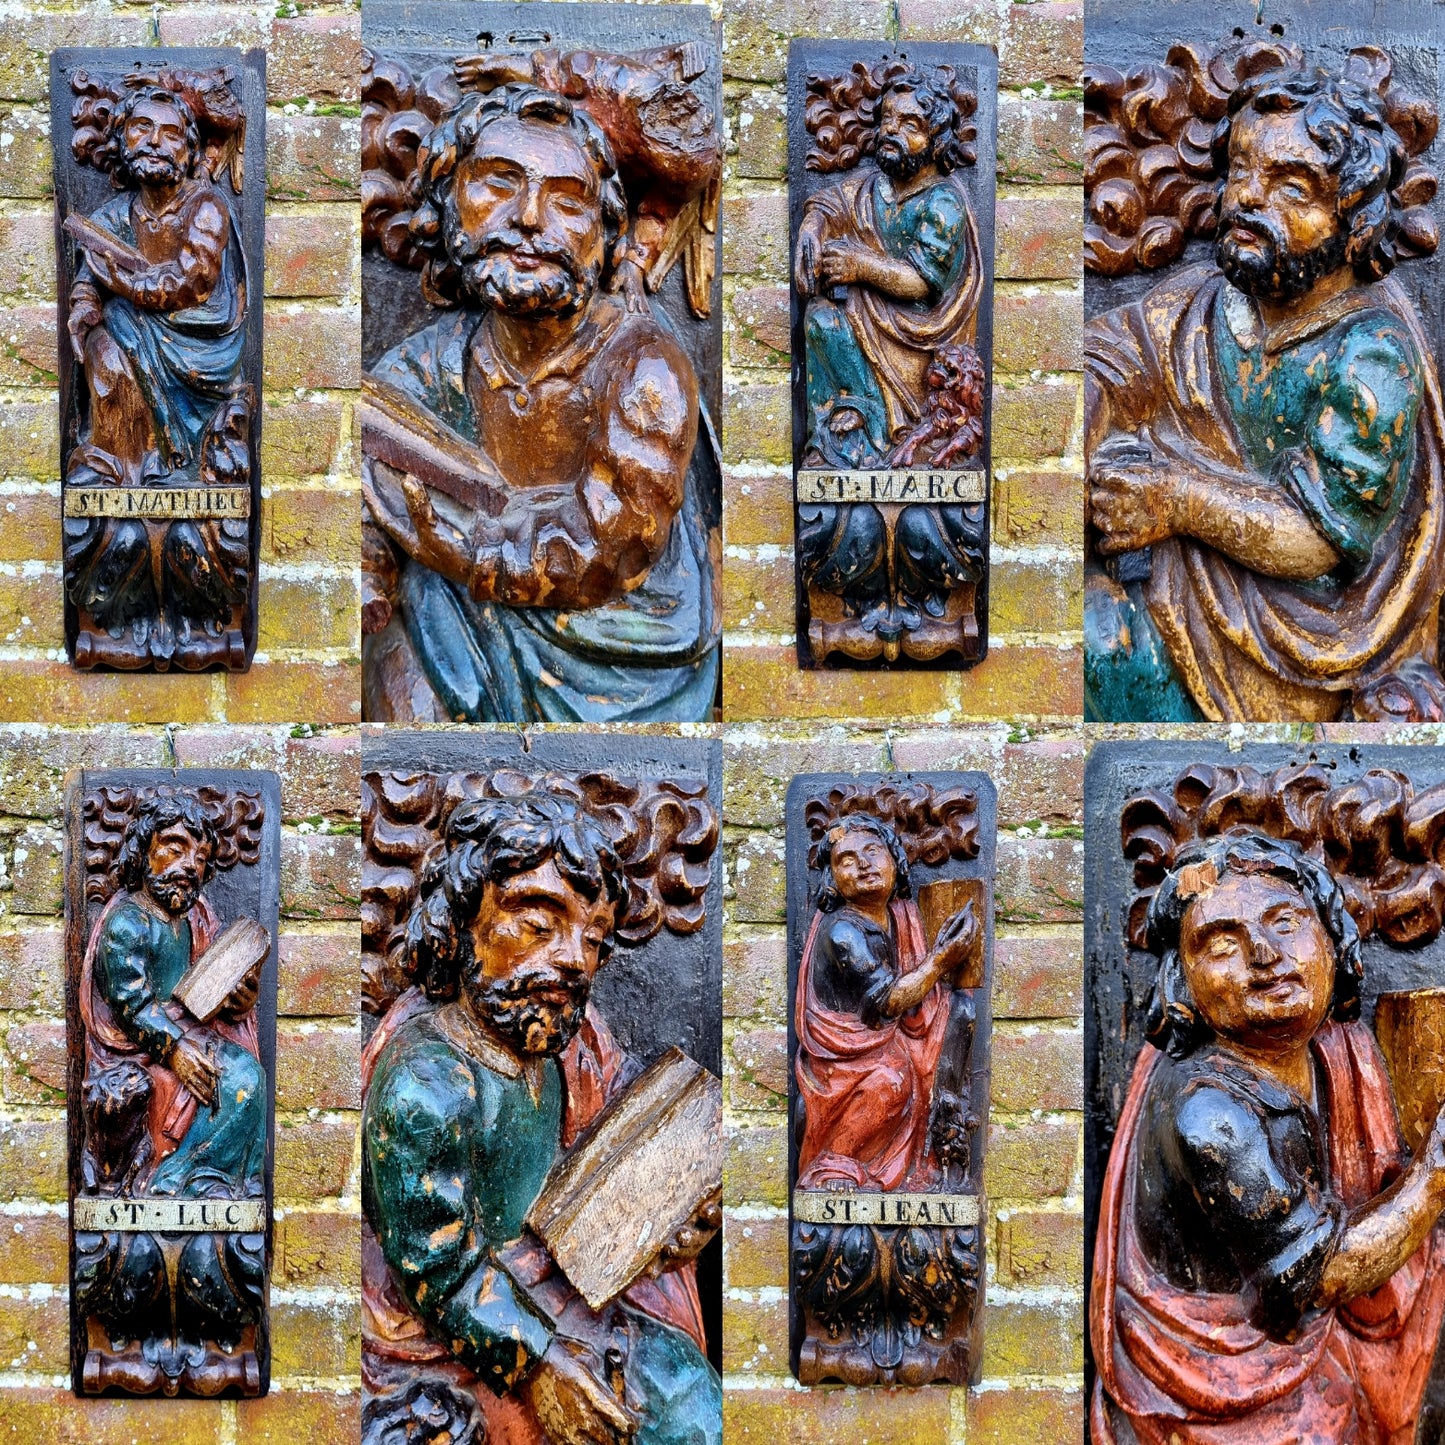 Superb Set of 4 x Large Early 17th Century French Antique Carved Oak Portrait Panels Depicting the Four Evangelists; St. Matthew, St. Mark, St. Luke and St. John